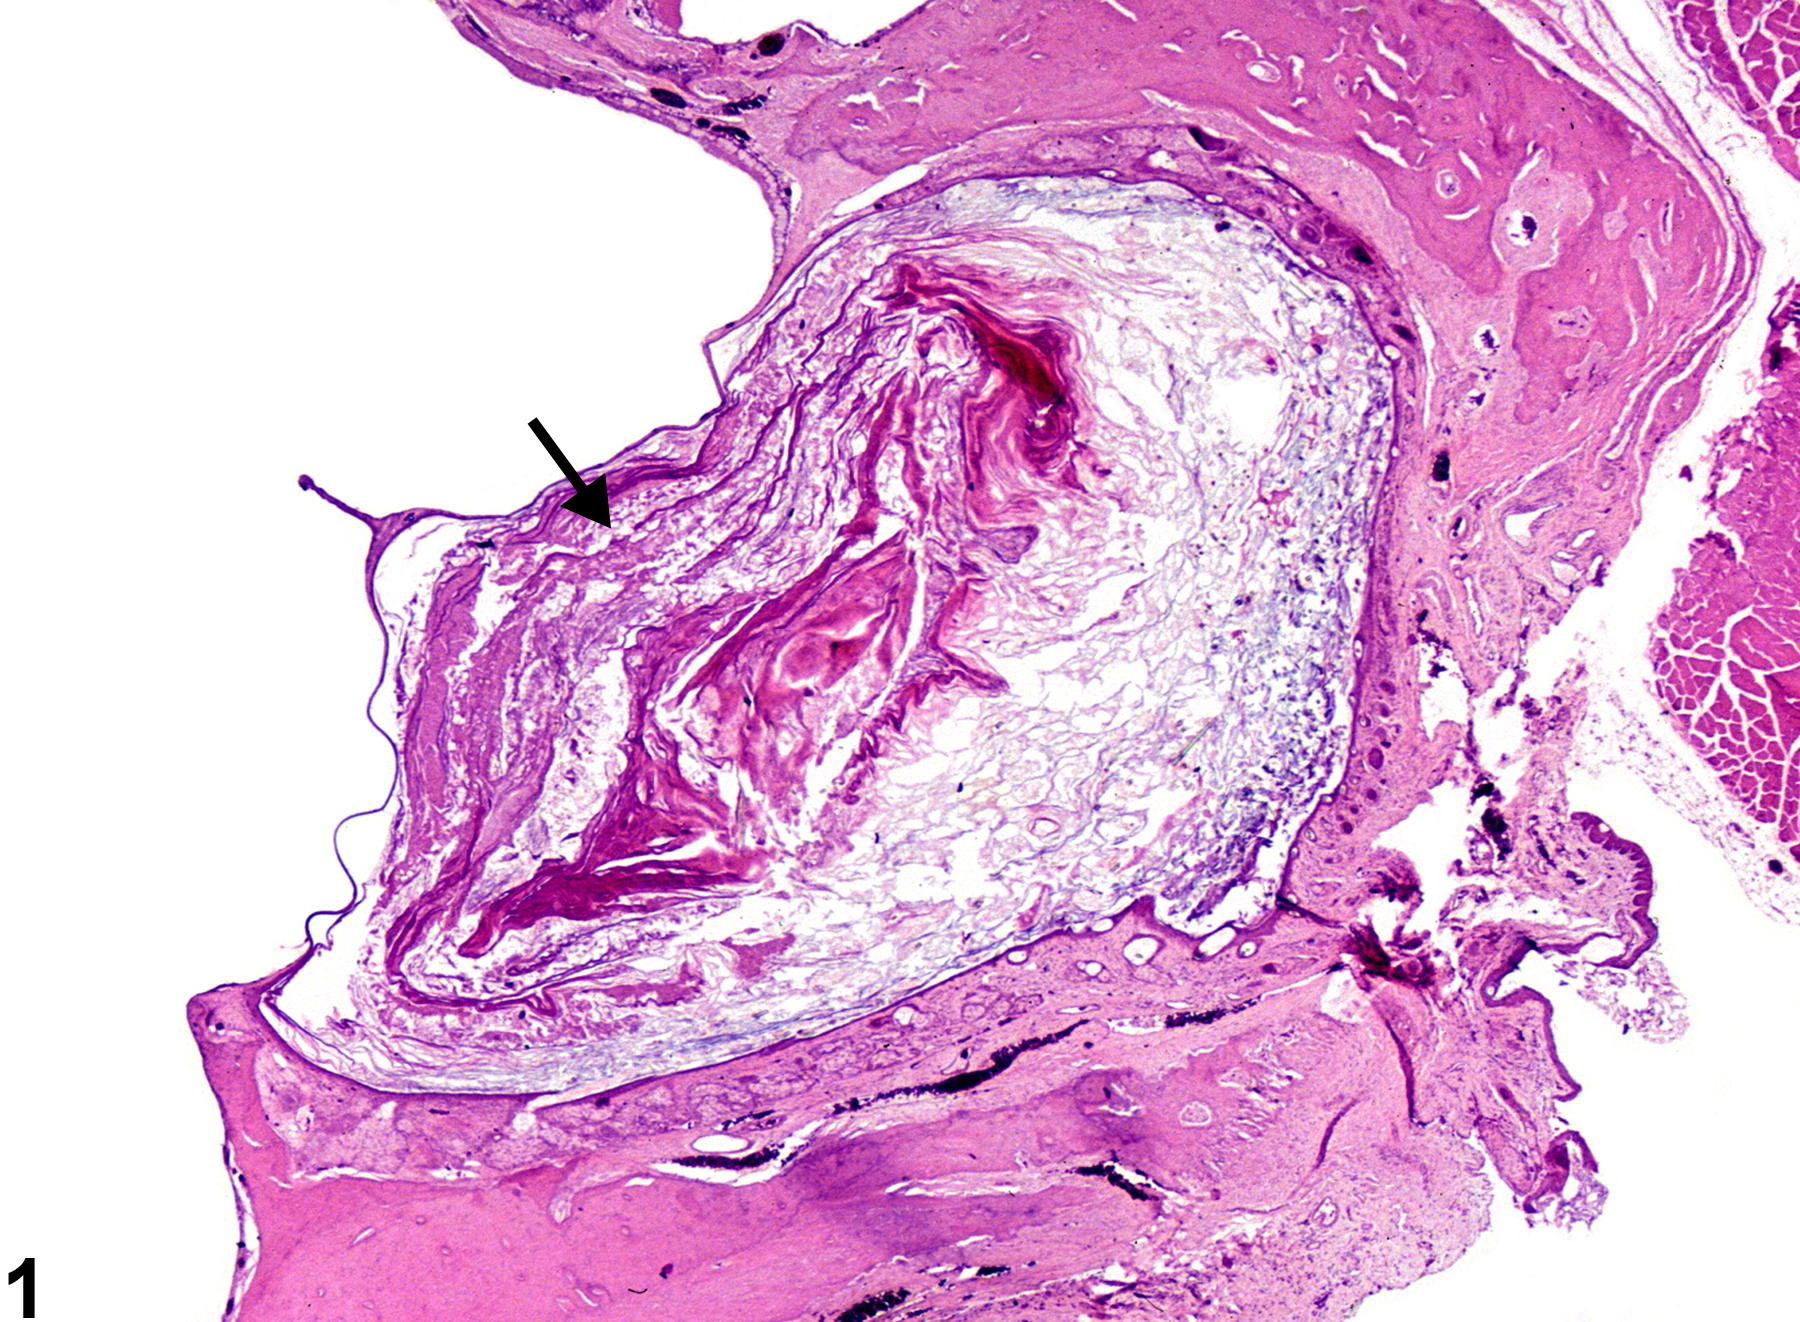 Image of canal dilation in the ear from a male F344/N rat in a chronic study